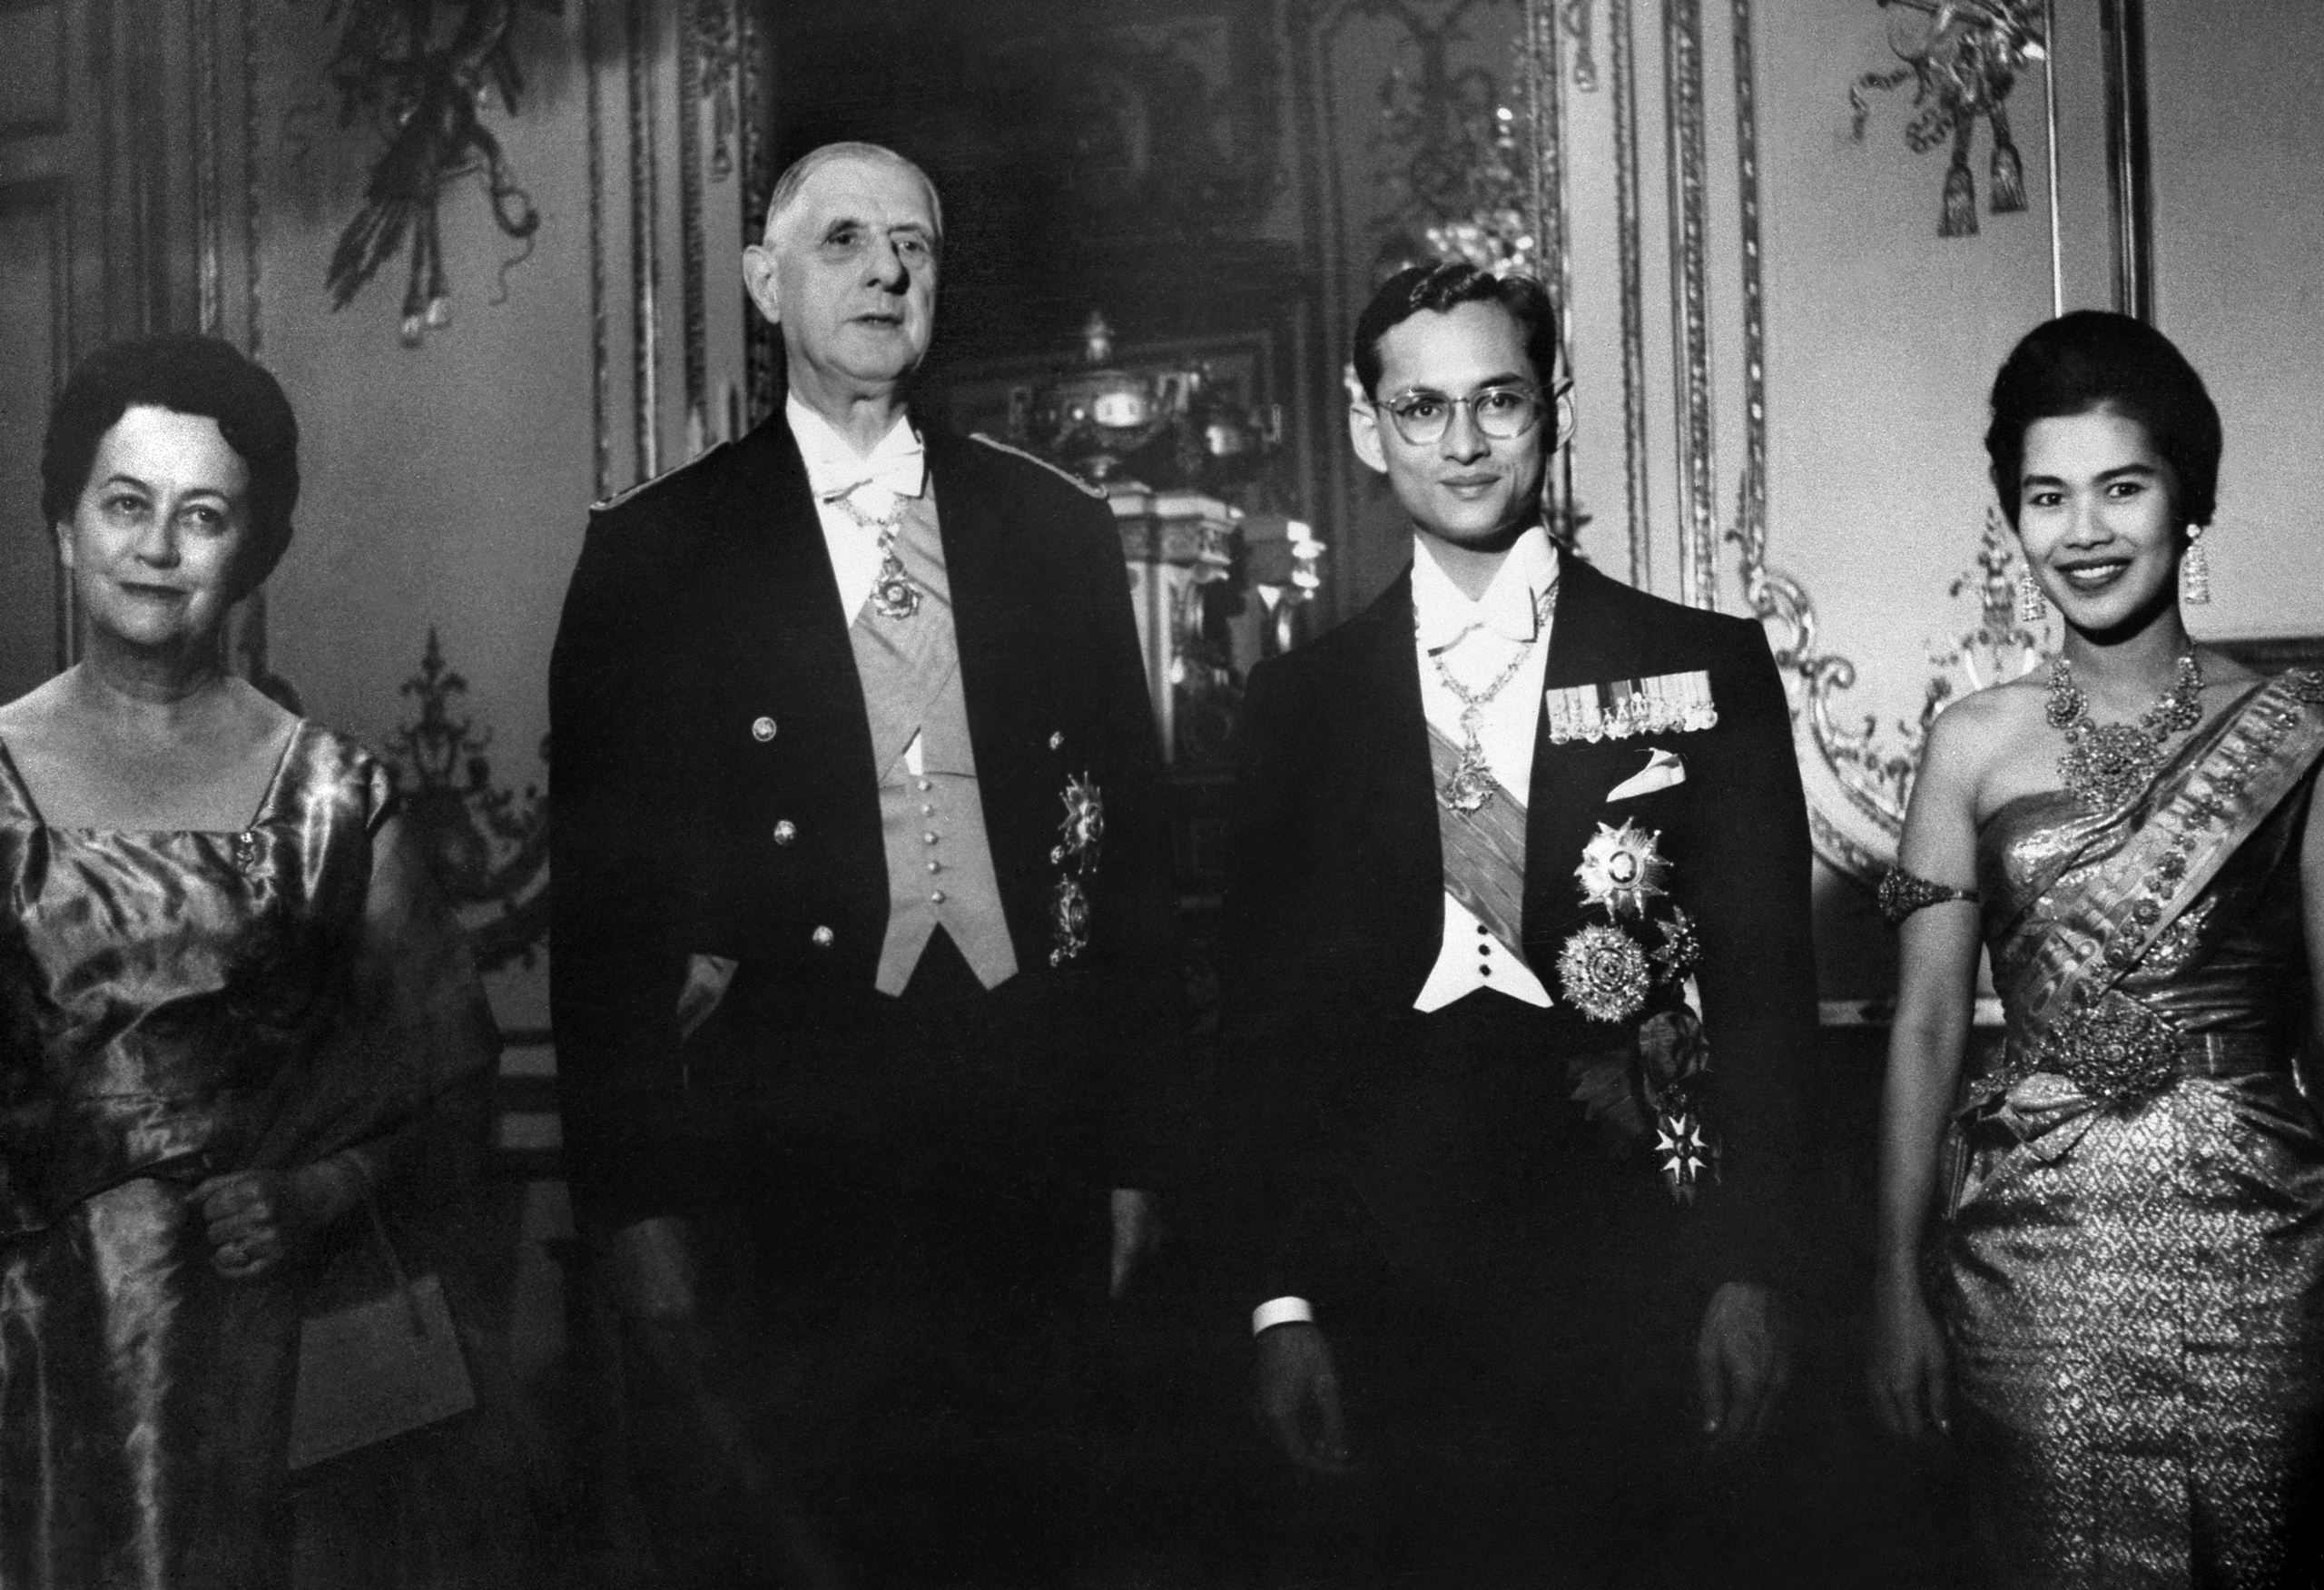 French President General de Gaulle (second from left) and his wife Yvonne de Gaulle (left) pose for photographers with King Bhumibol Adulyadej and his wife queen Sirikit after a dinner at the Elysee Palace in Paris on Oct. 12, 1960.